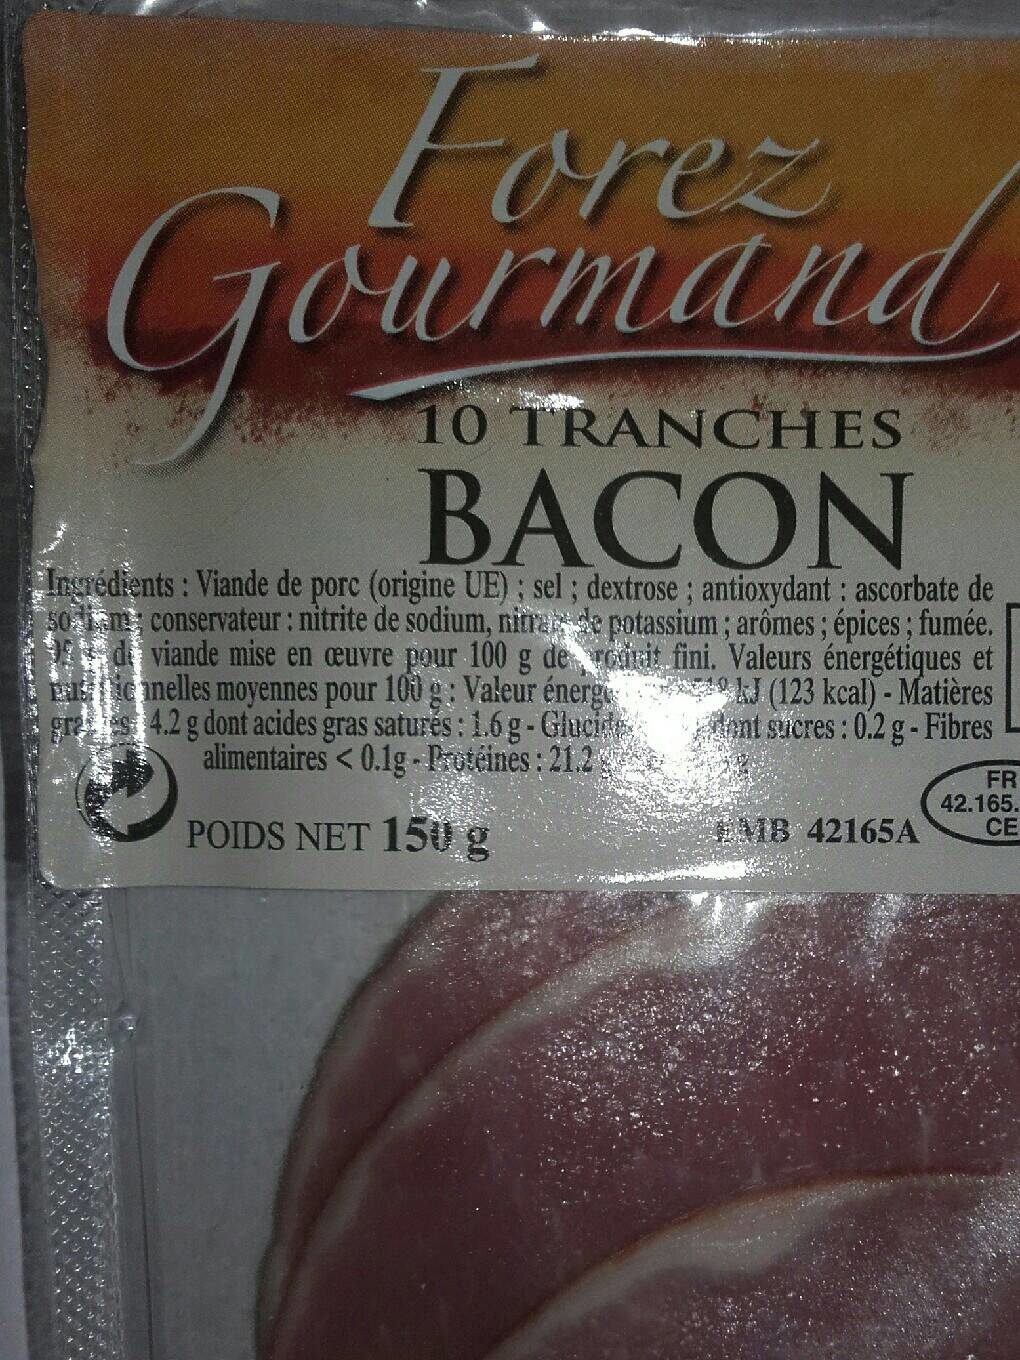 Bacon 10 Tranches 150g - Nutrition facts - fr